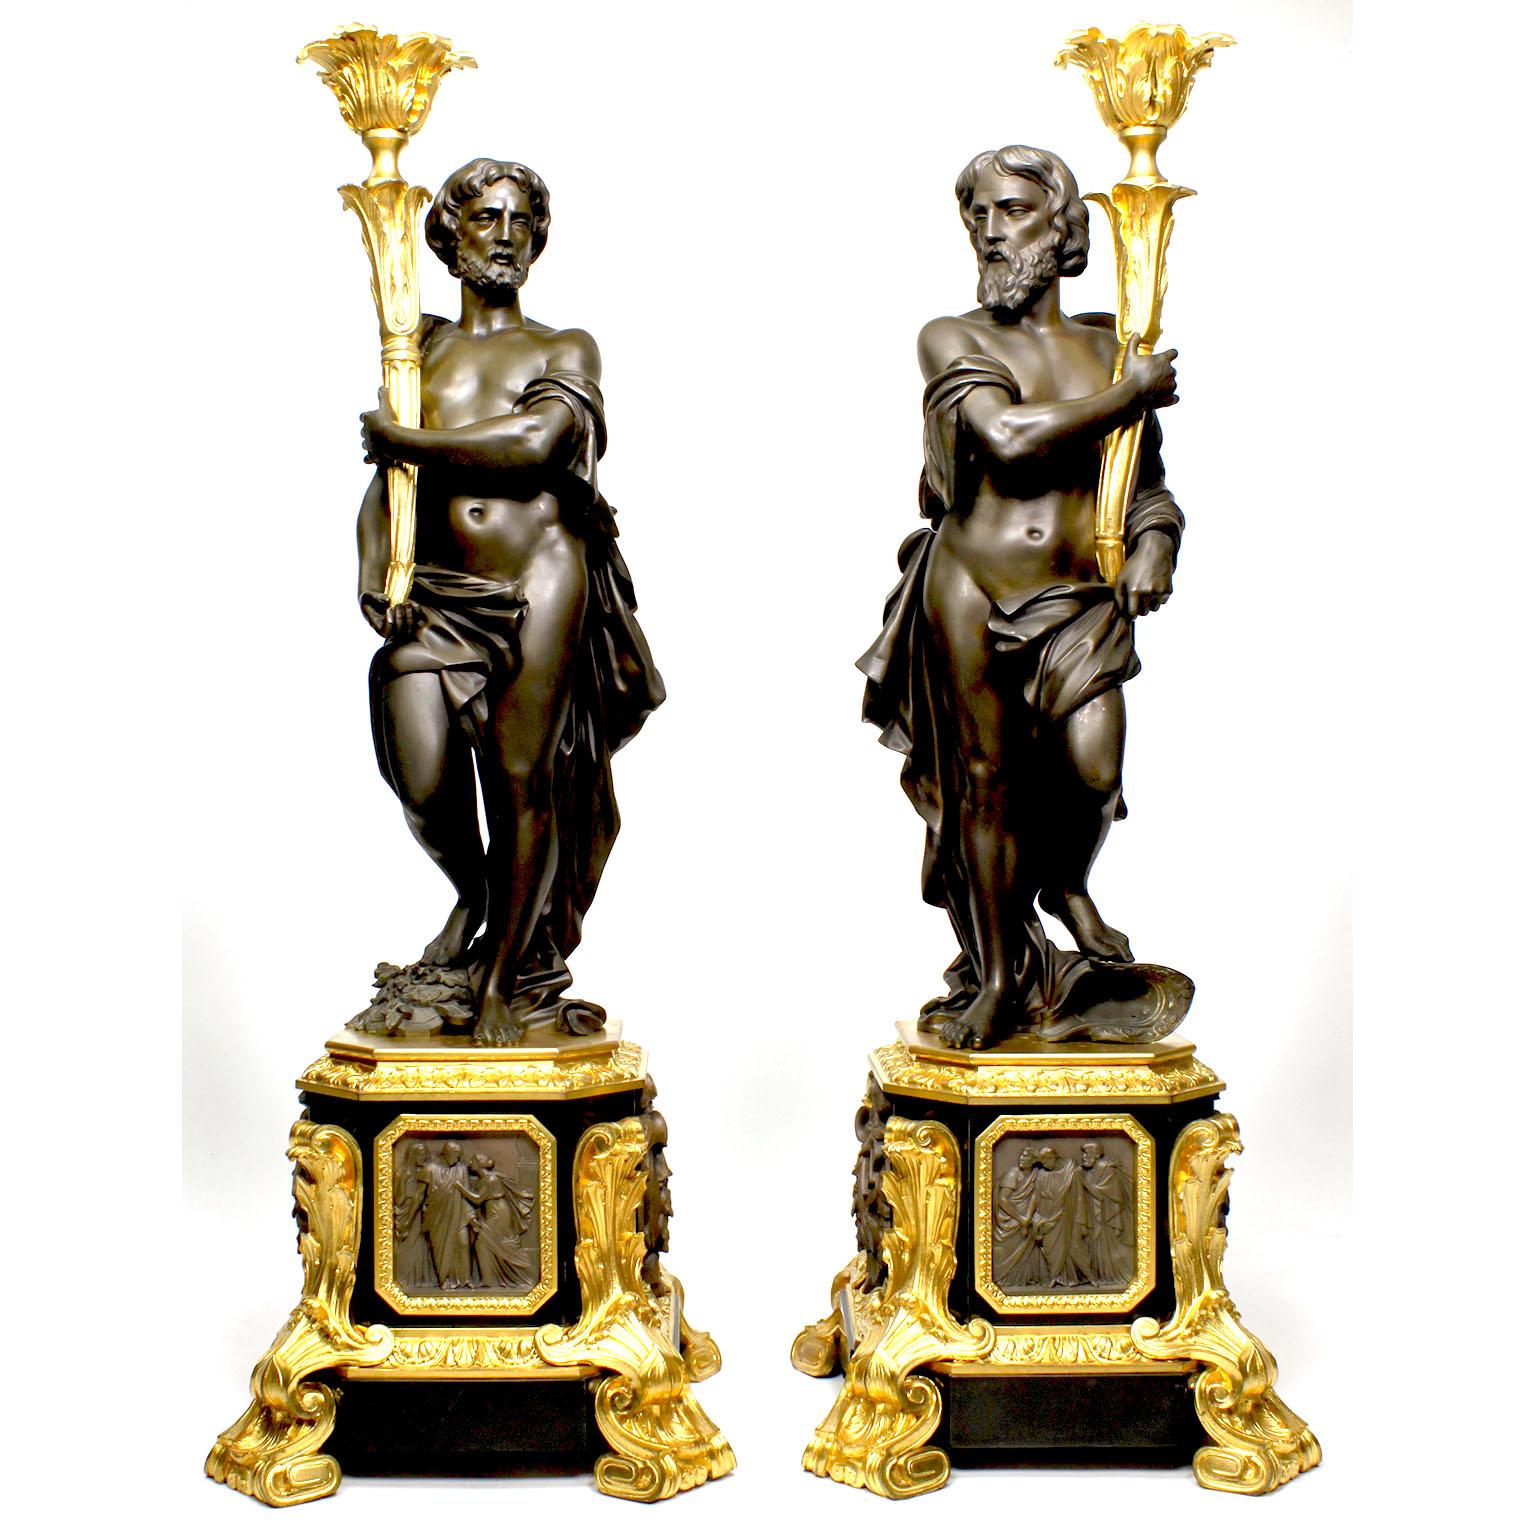 A very fine pair of French 19th century neoclassical Greco-Roman style patinanted bronze and ormolu mounted figural candelabra by Henri Picard (French, Active from 1831-1864). The large and impressive pair of single-light candelabra, each with a